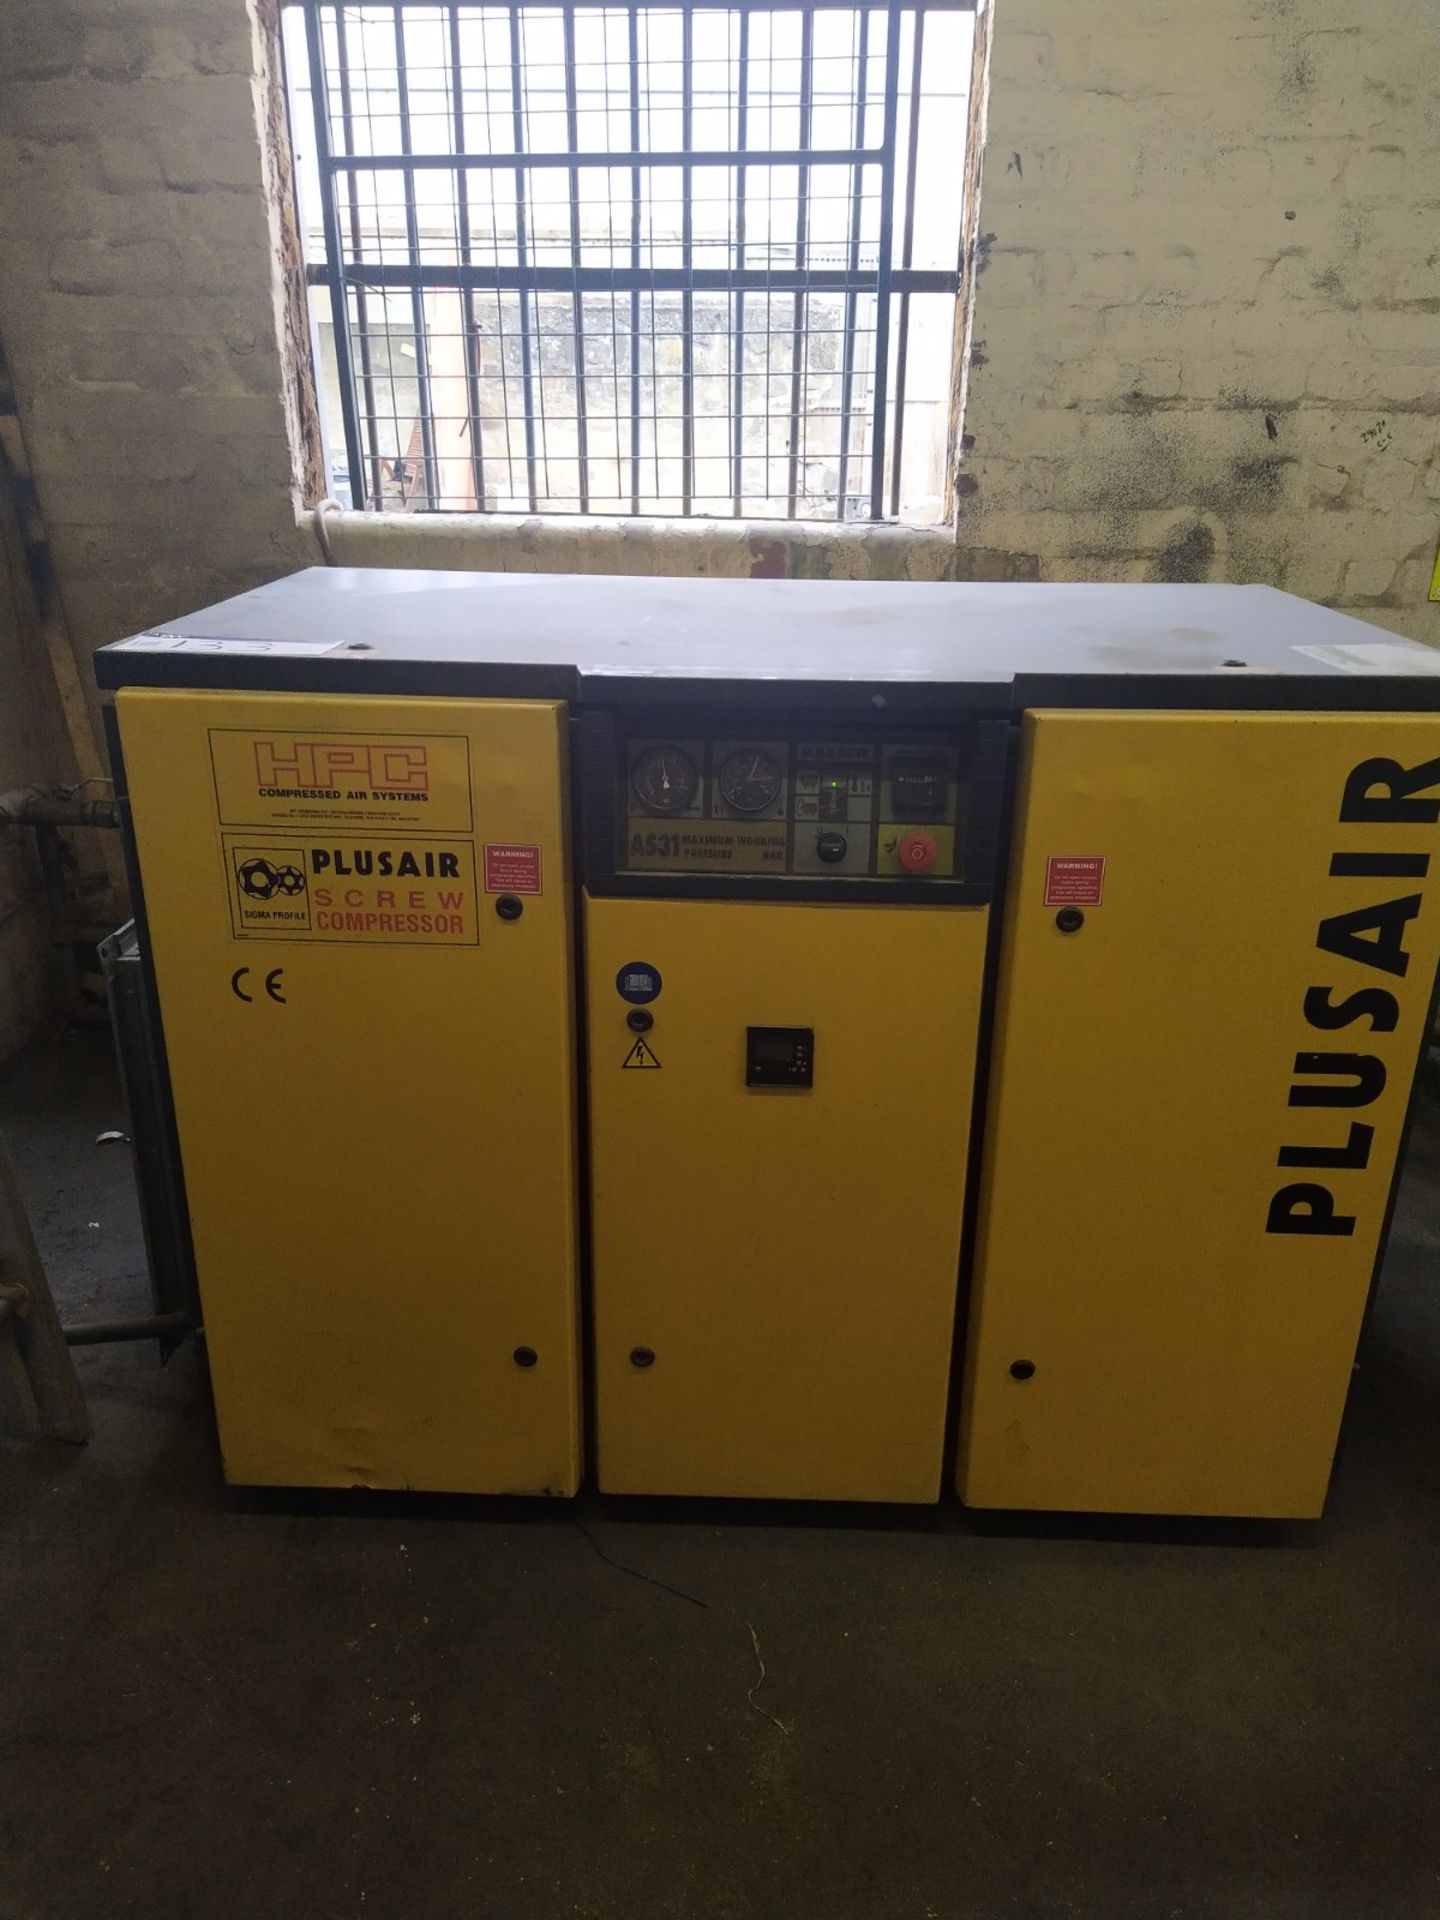 Plusair Screw Compressor, free loading onto purchasers transport - Yes, itemitem located at